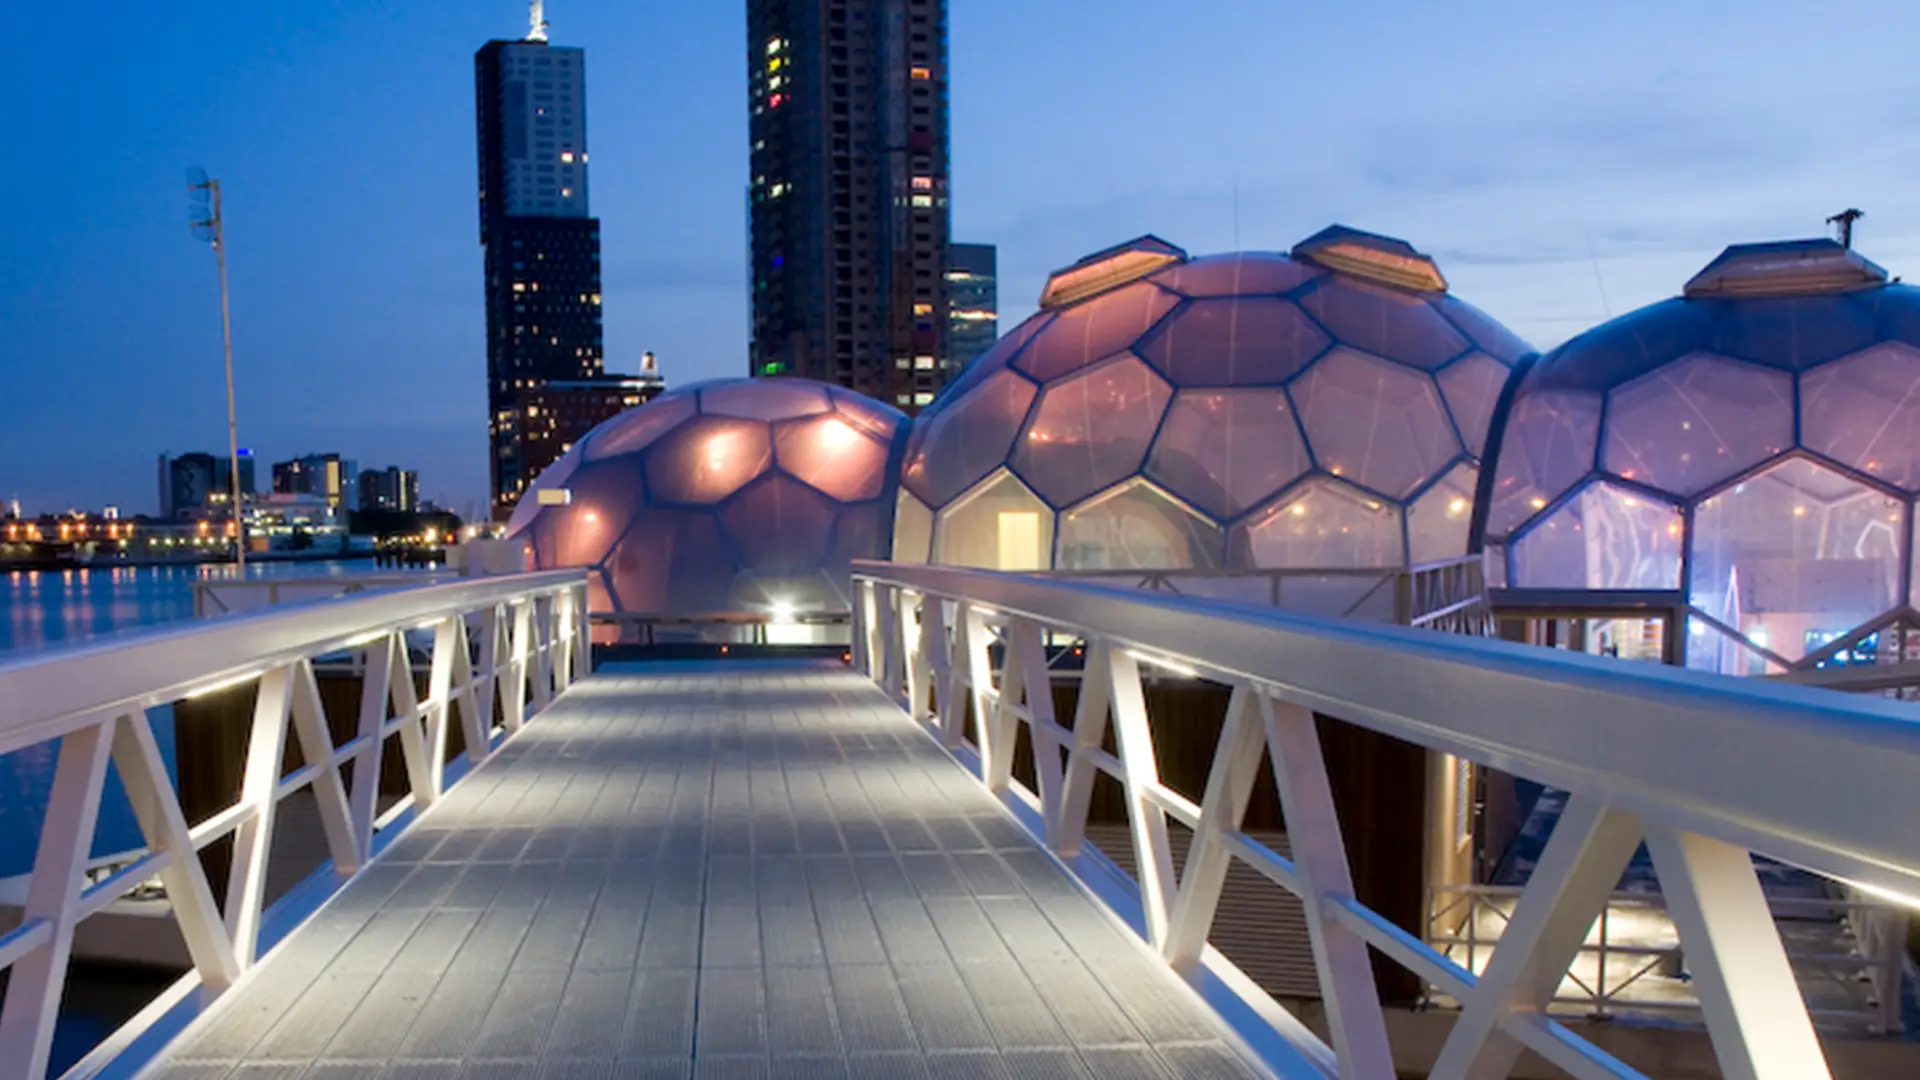 Designed by Deltasync and Public Domain Architects, the domes of the floating pavilion in Rotterdam are clad in Texlon® ETFE by Vector Foiltec